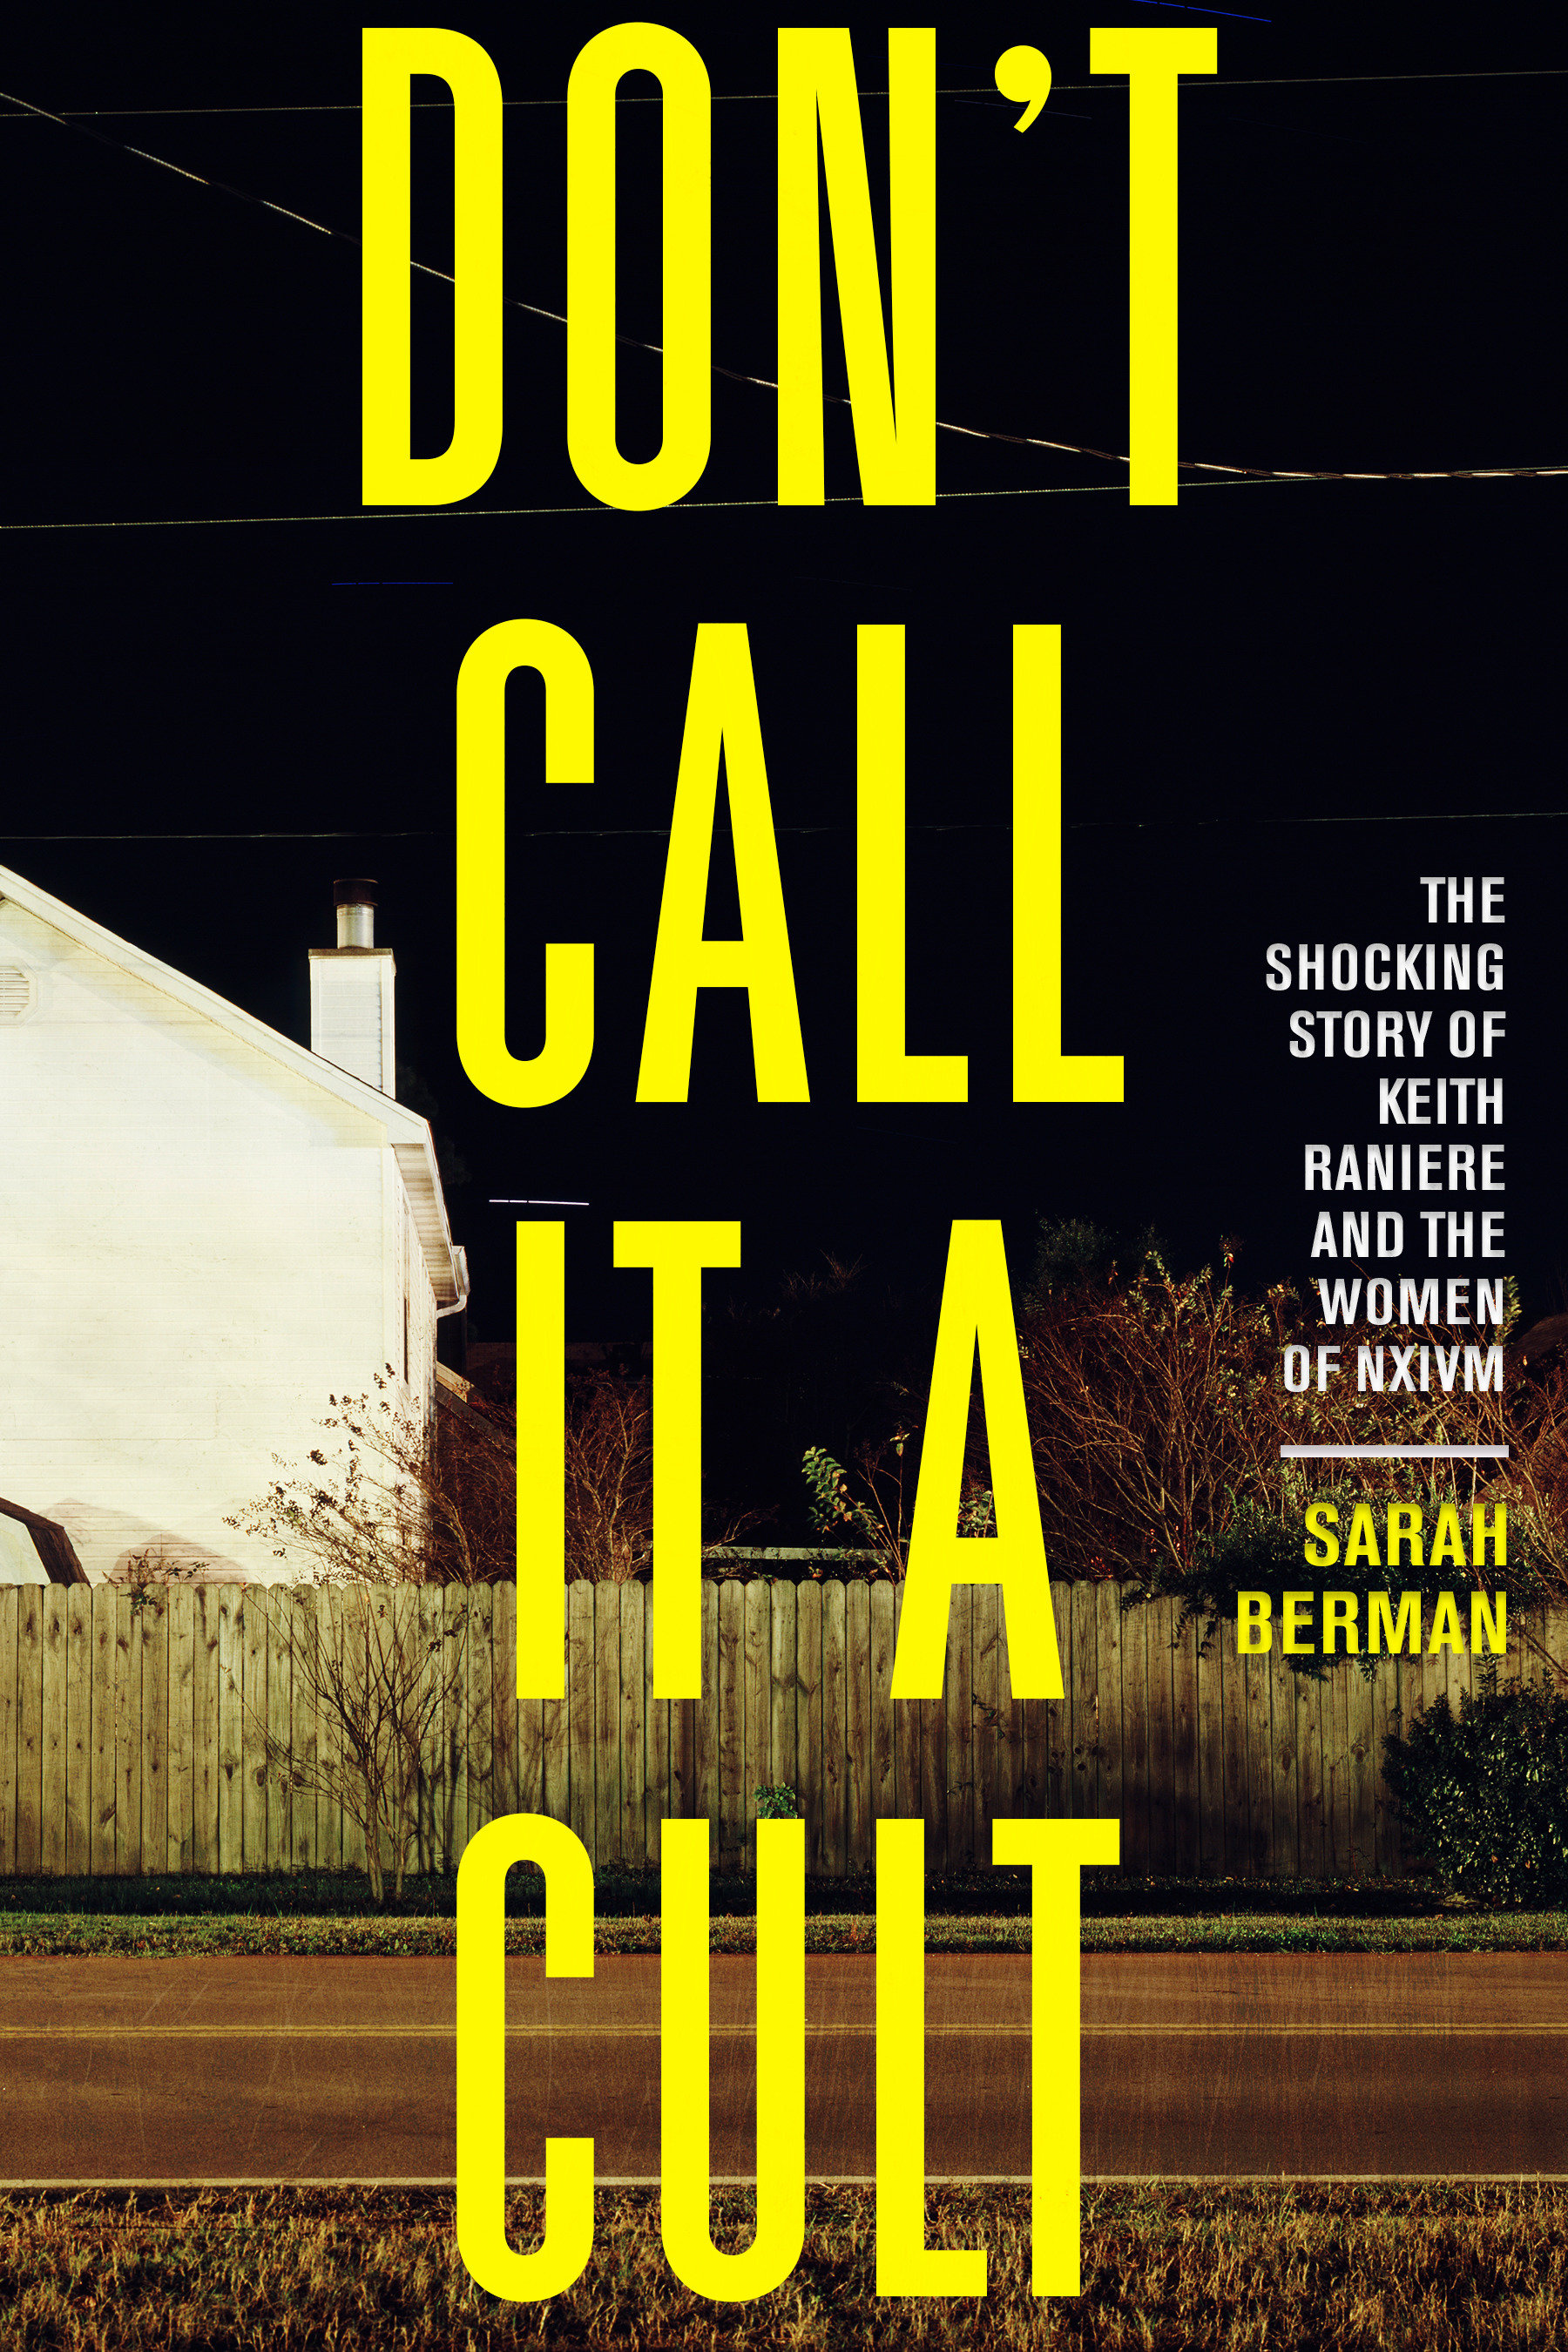 Image de couverture de Don't Call it a Cult [electronic resource] : The Shocking Story of Keith Raniere and the Women of NXIVM